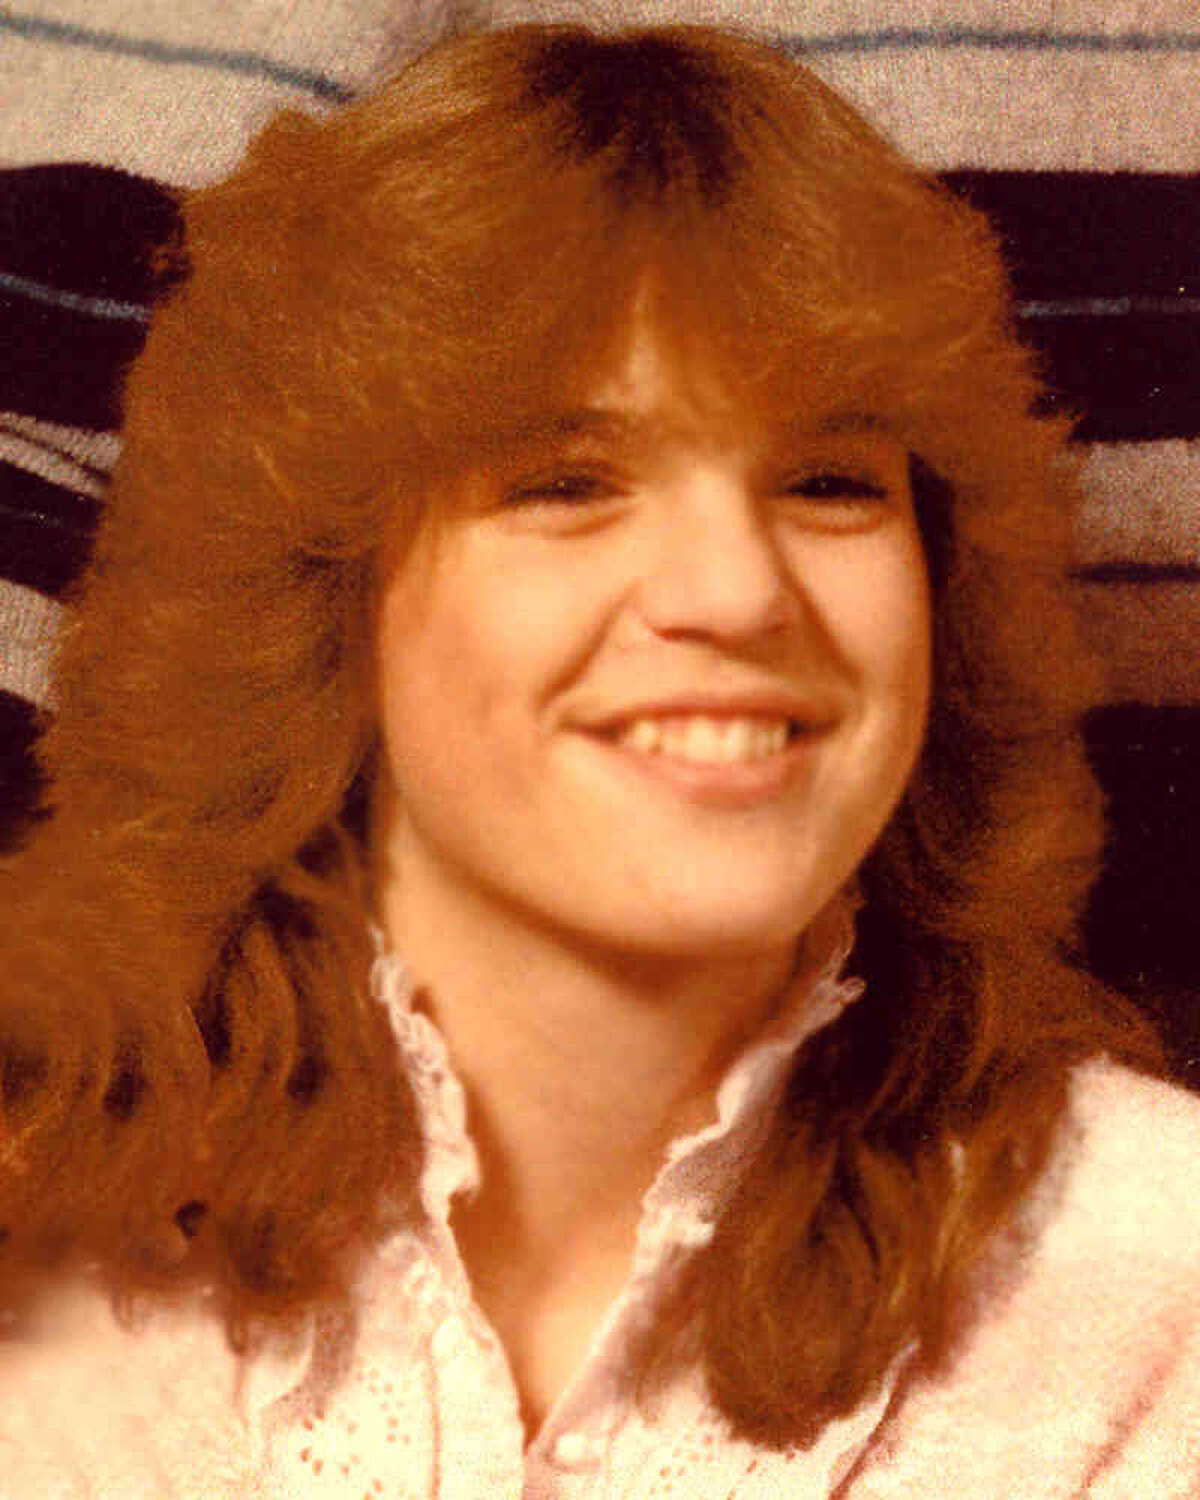 Tammie McCormick was 13 when she disappeared in Saratoga Springs on April 29, 1986. (Courtesy: National Center for Missing & Exploited Children)